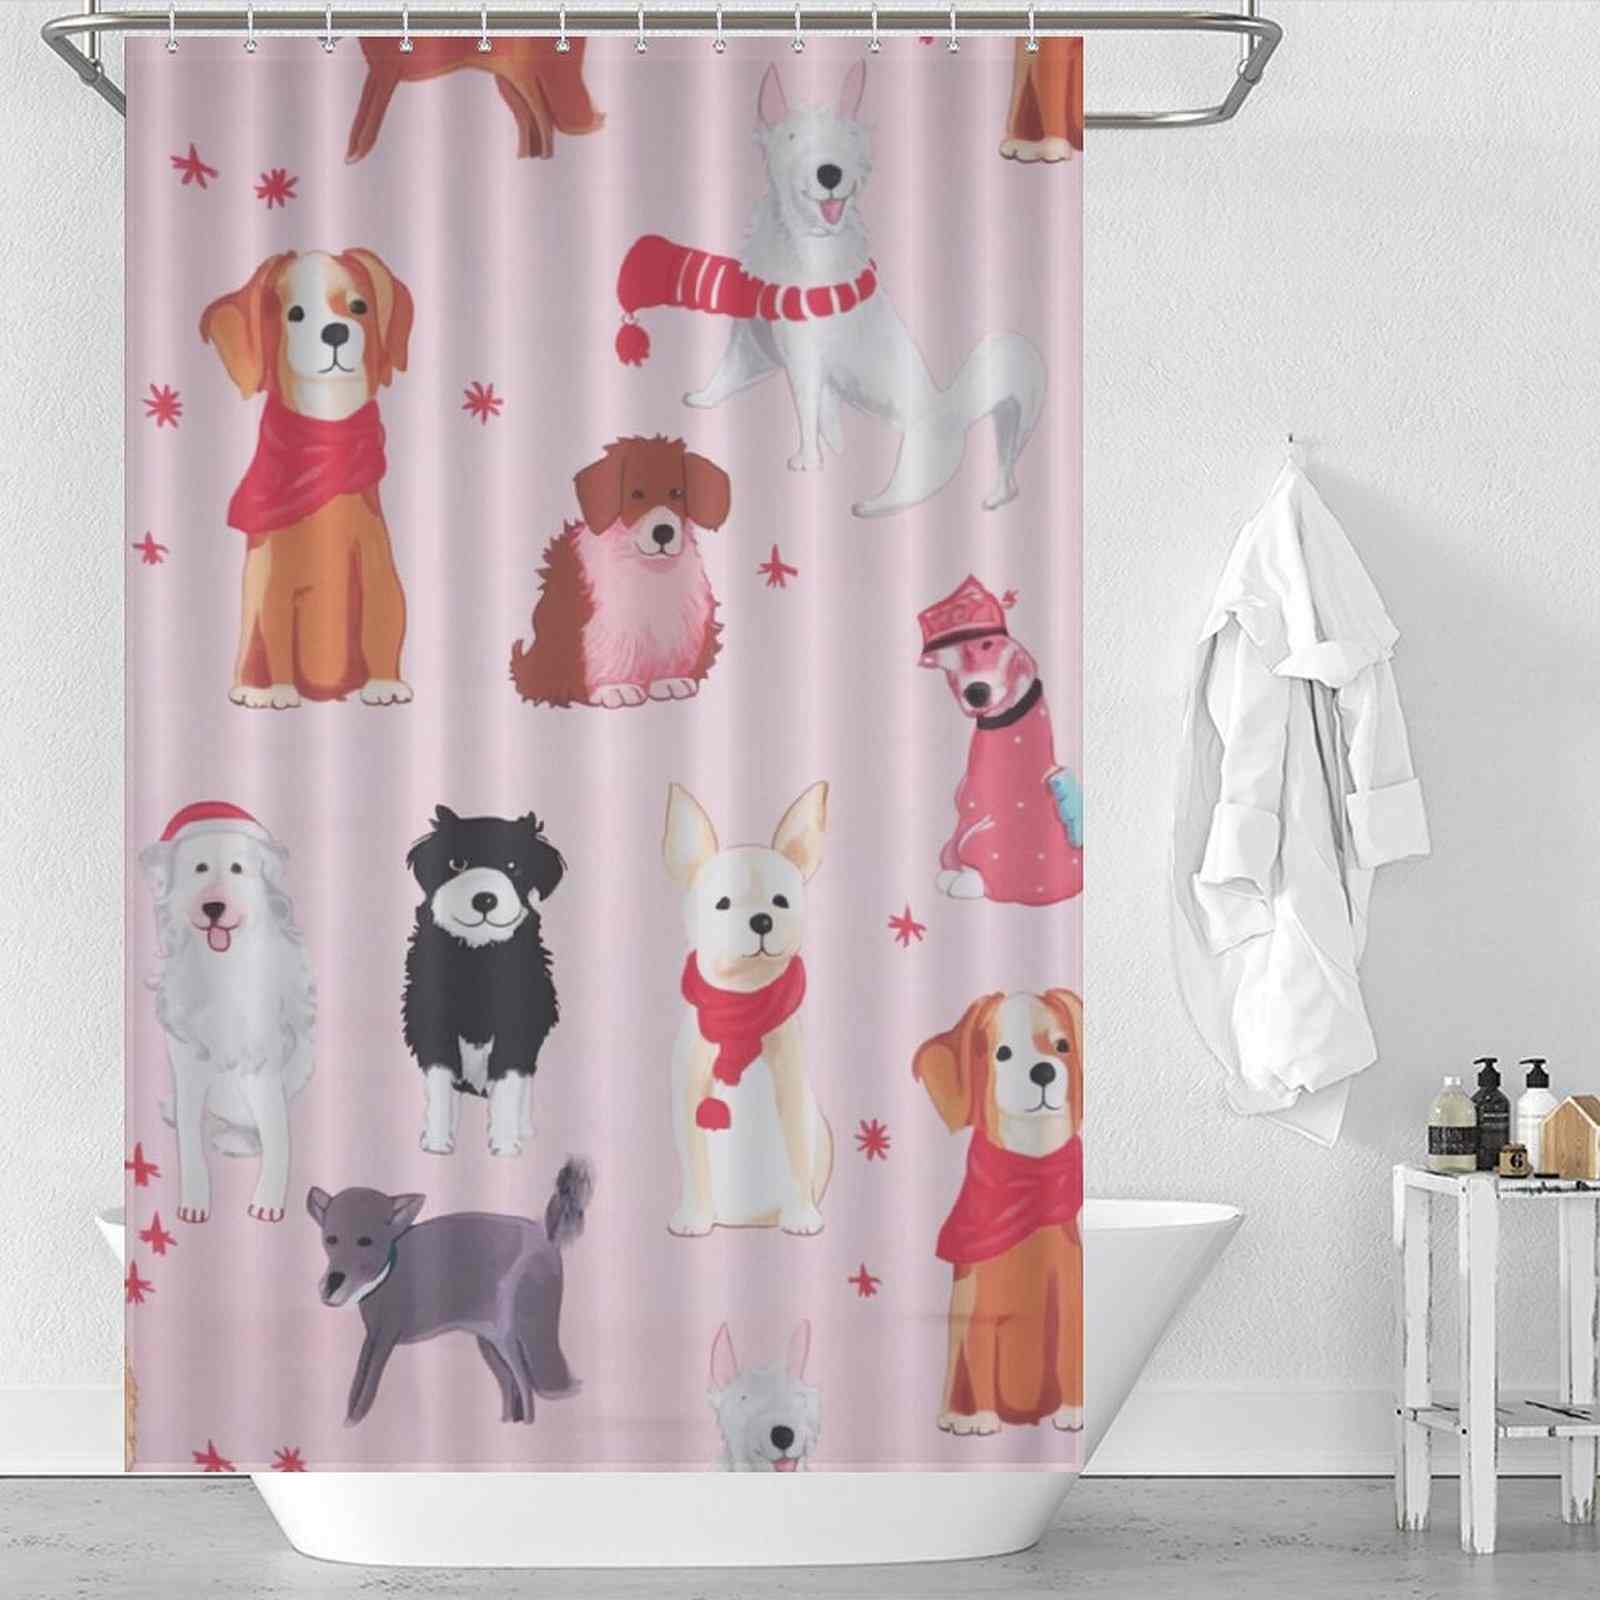 A pink shower curtain featuring adorable dogs, perfect for adding a touch of whimsy to your bathroom decor.